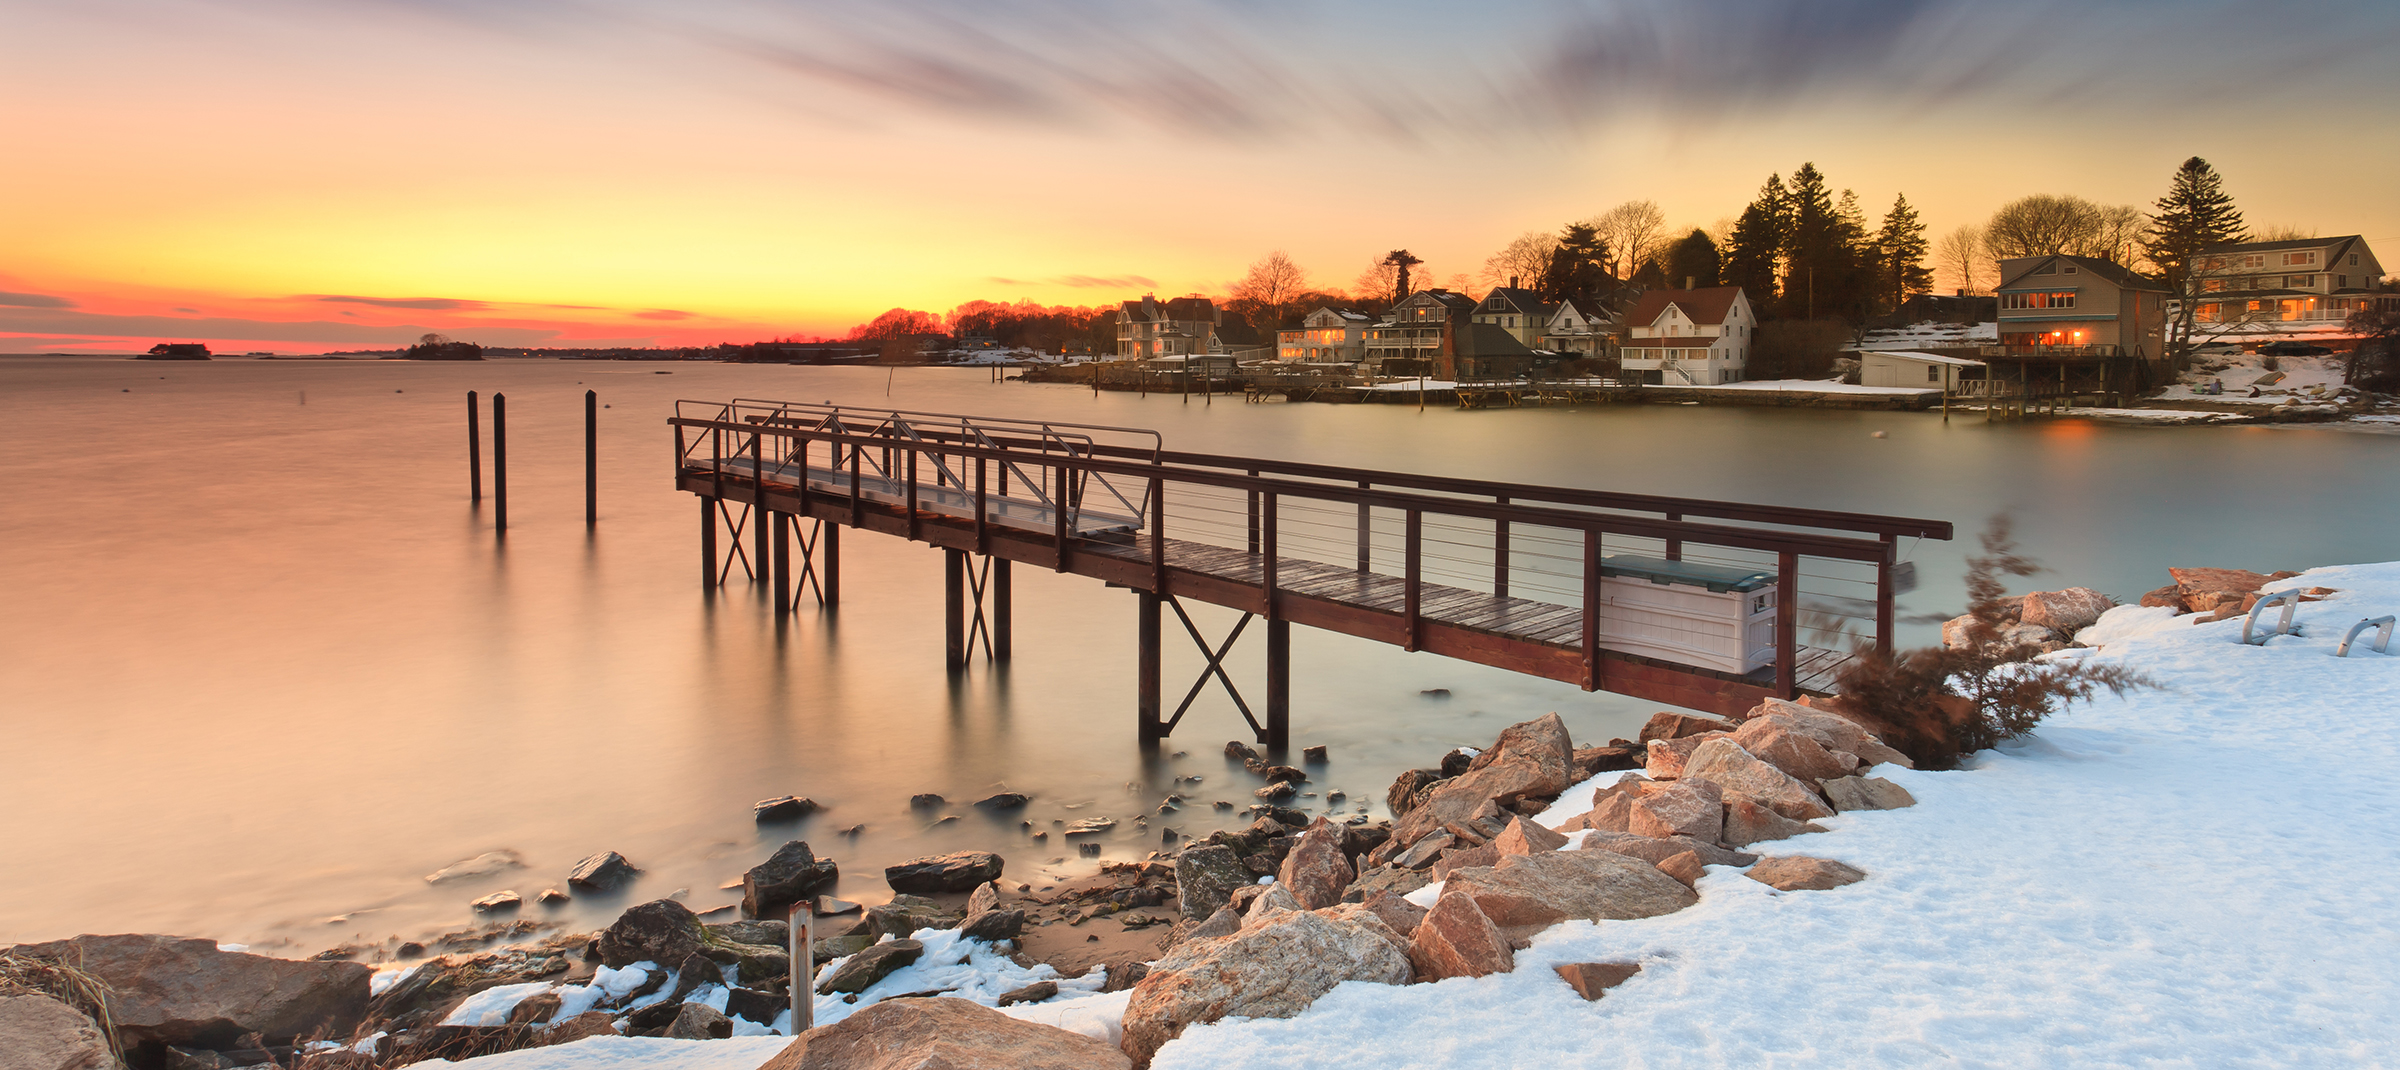 Dusk at the Pier, captured during the winter in Stony Creek, Brandford Connecticut